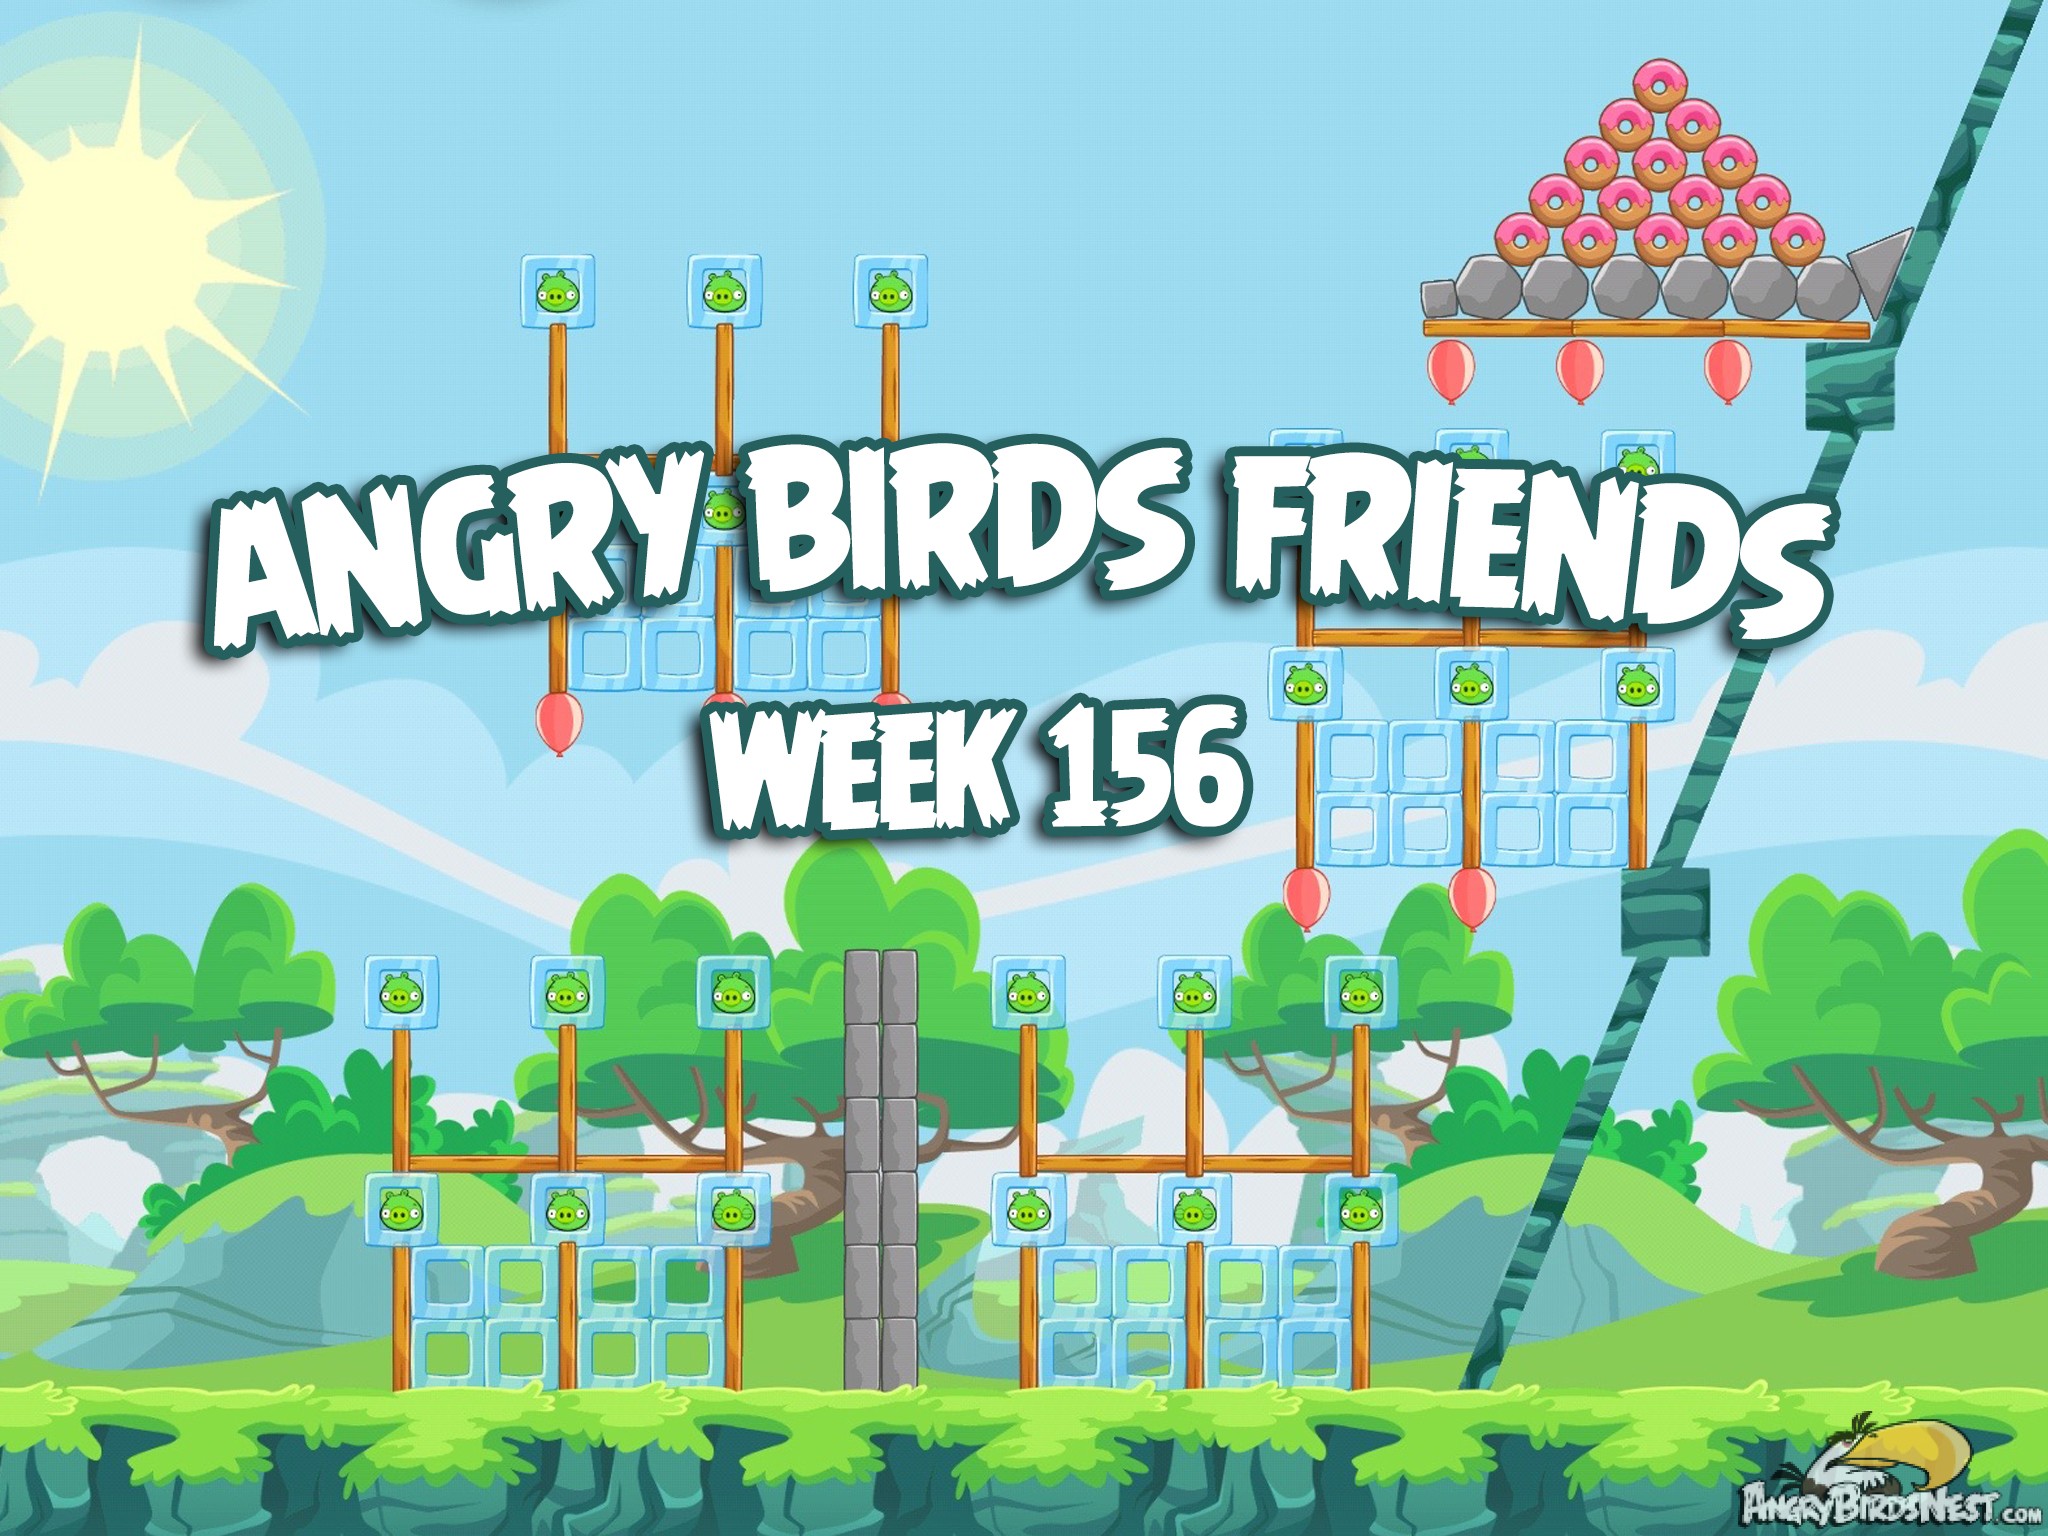 Angry Birds Friends Week 156 Feature Image